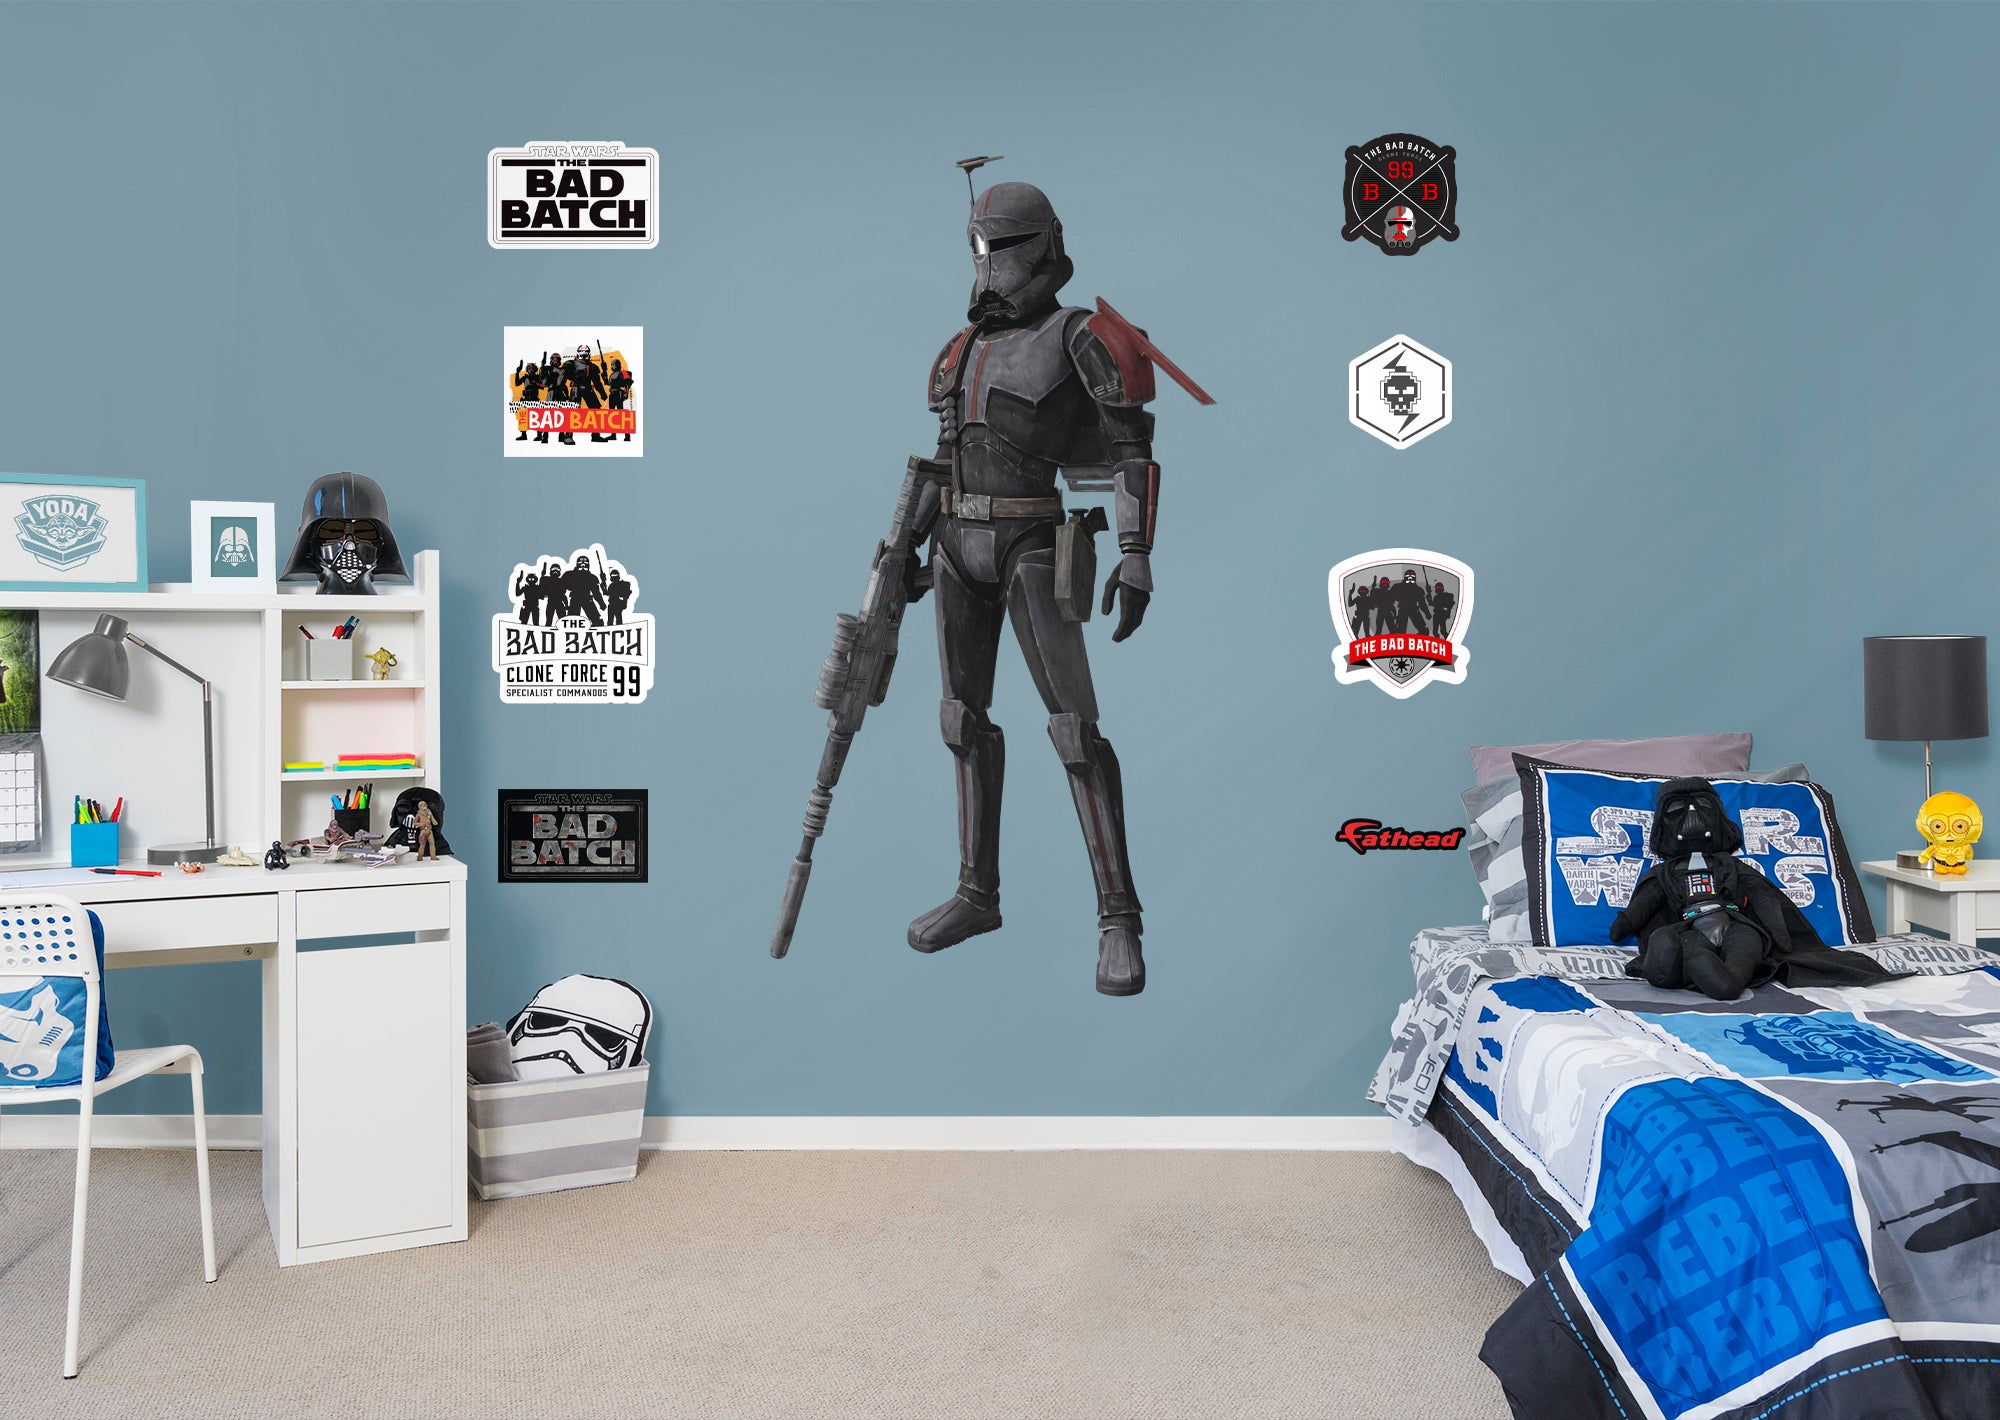 Bad Batch Crosshair - Officially Licensed Star Wars Removable Wall Decal Large by Fathead | Vinyl